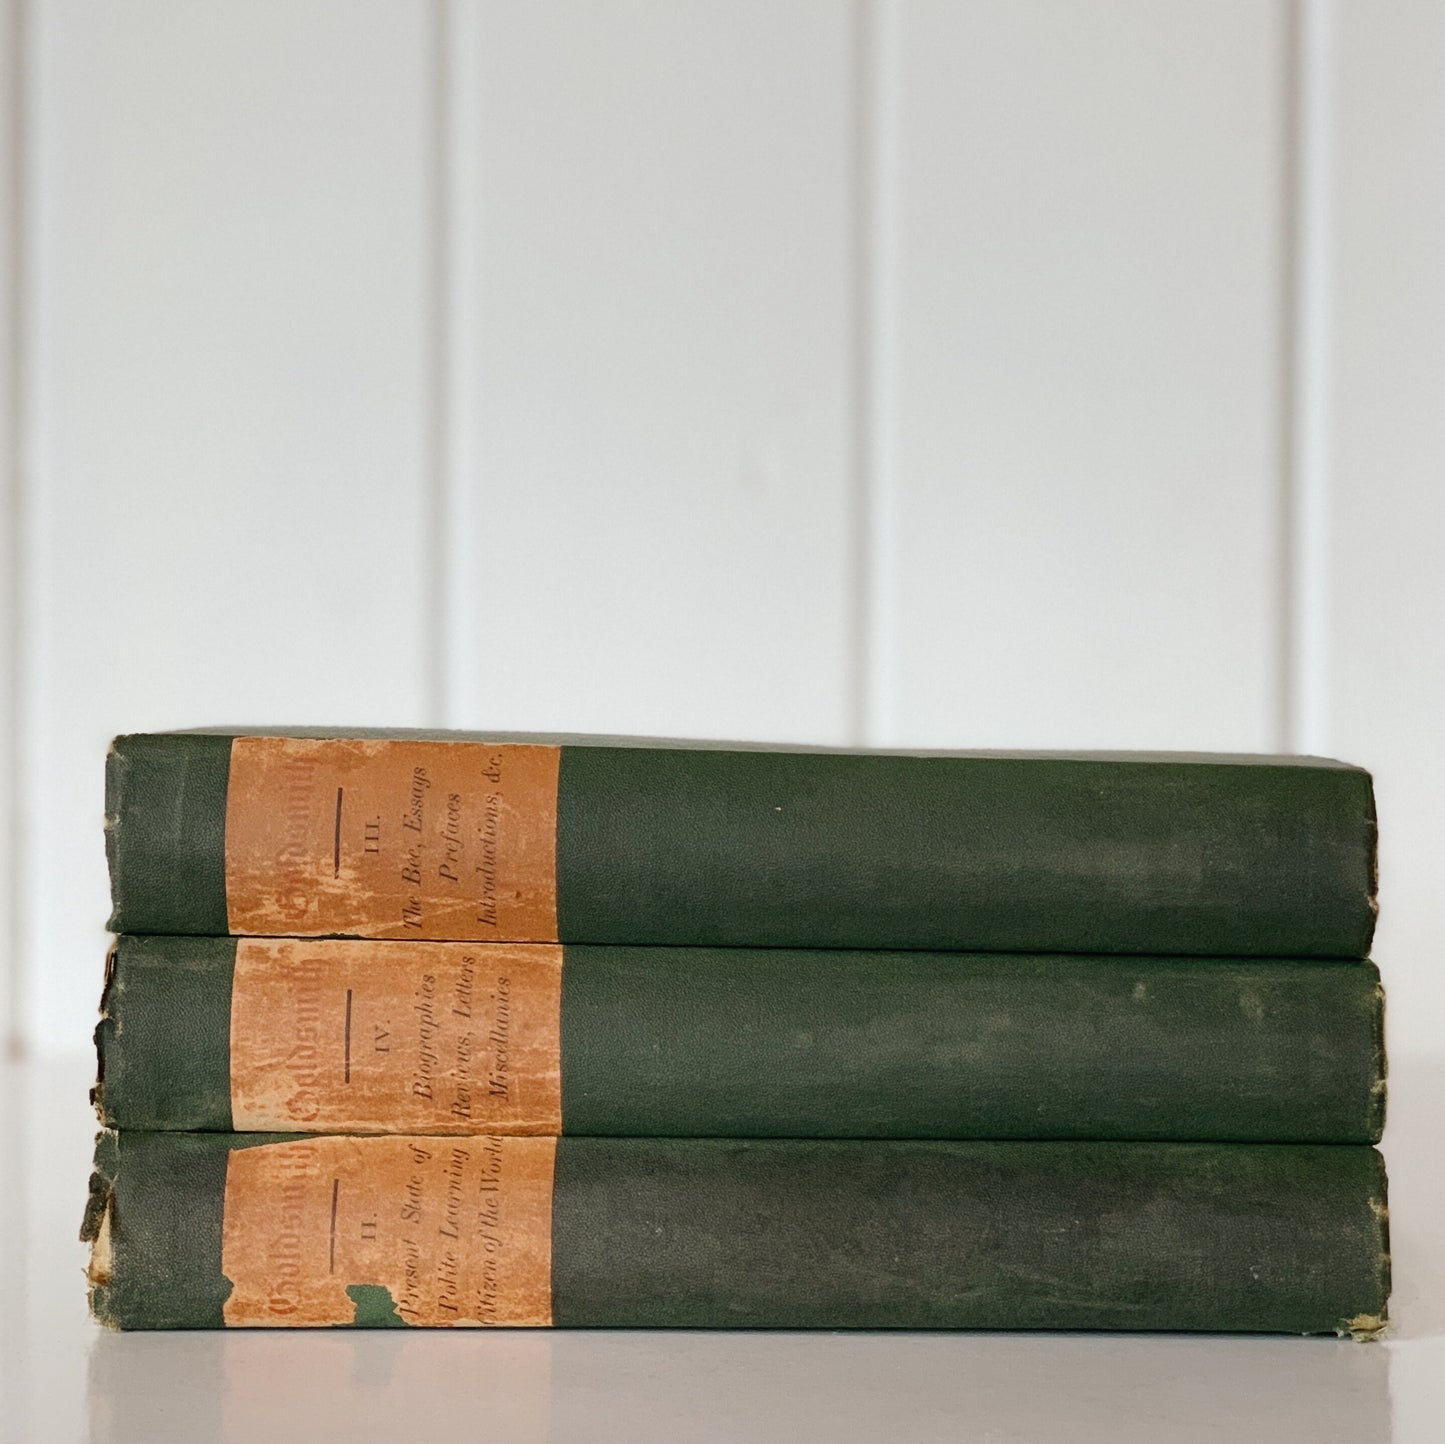 The Works of Oliver Goldsmith, Antique Green Books for Shelf Styling, 1881